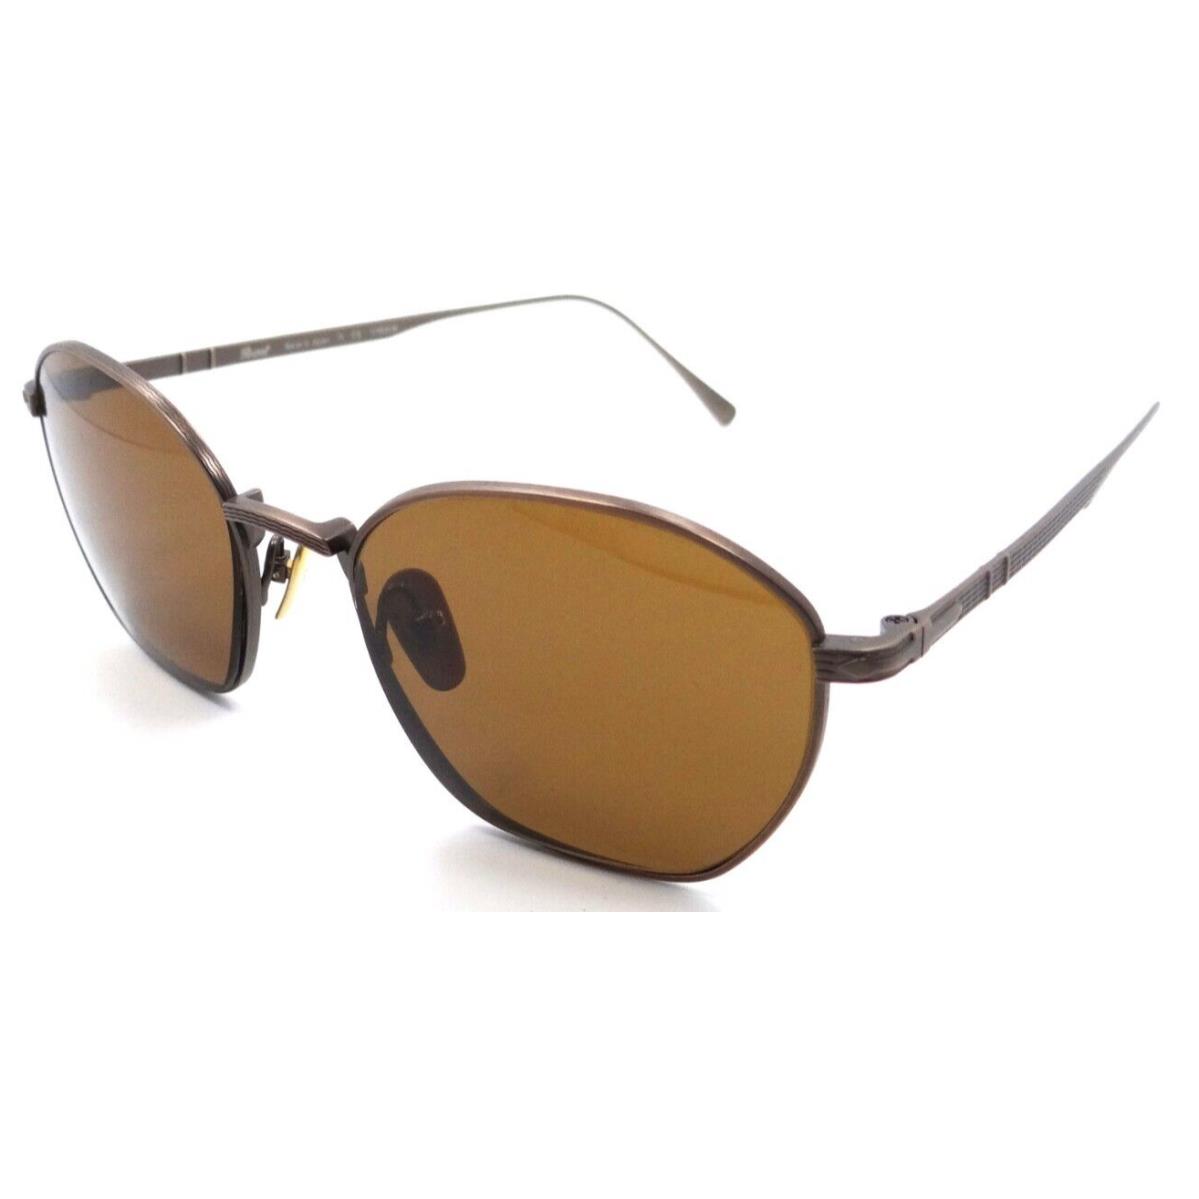 Persol Sunglasses PO 5004ST 8003/33 50-19-145 Bronze / Brown Made in Japan